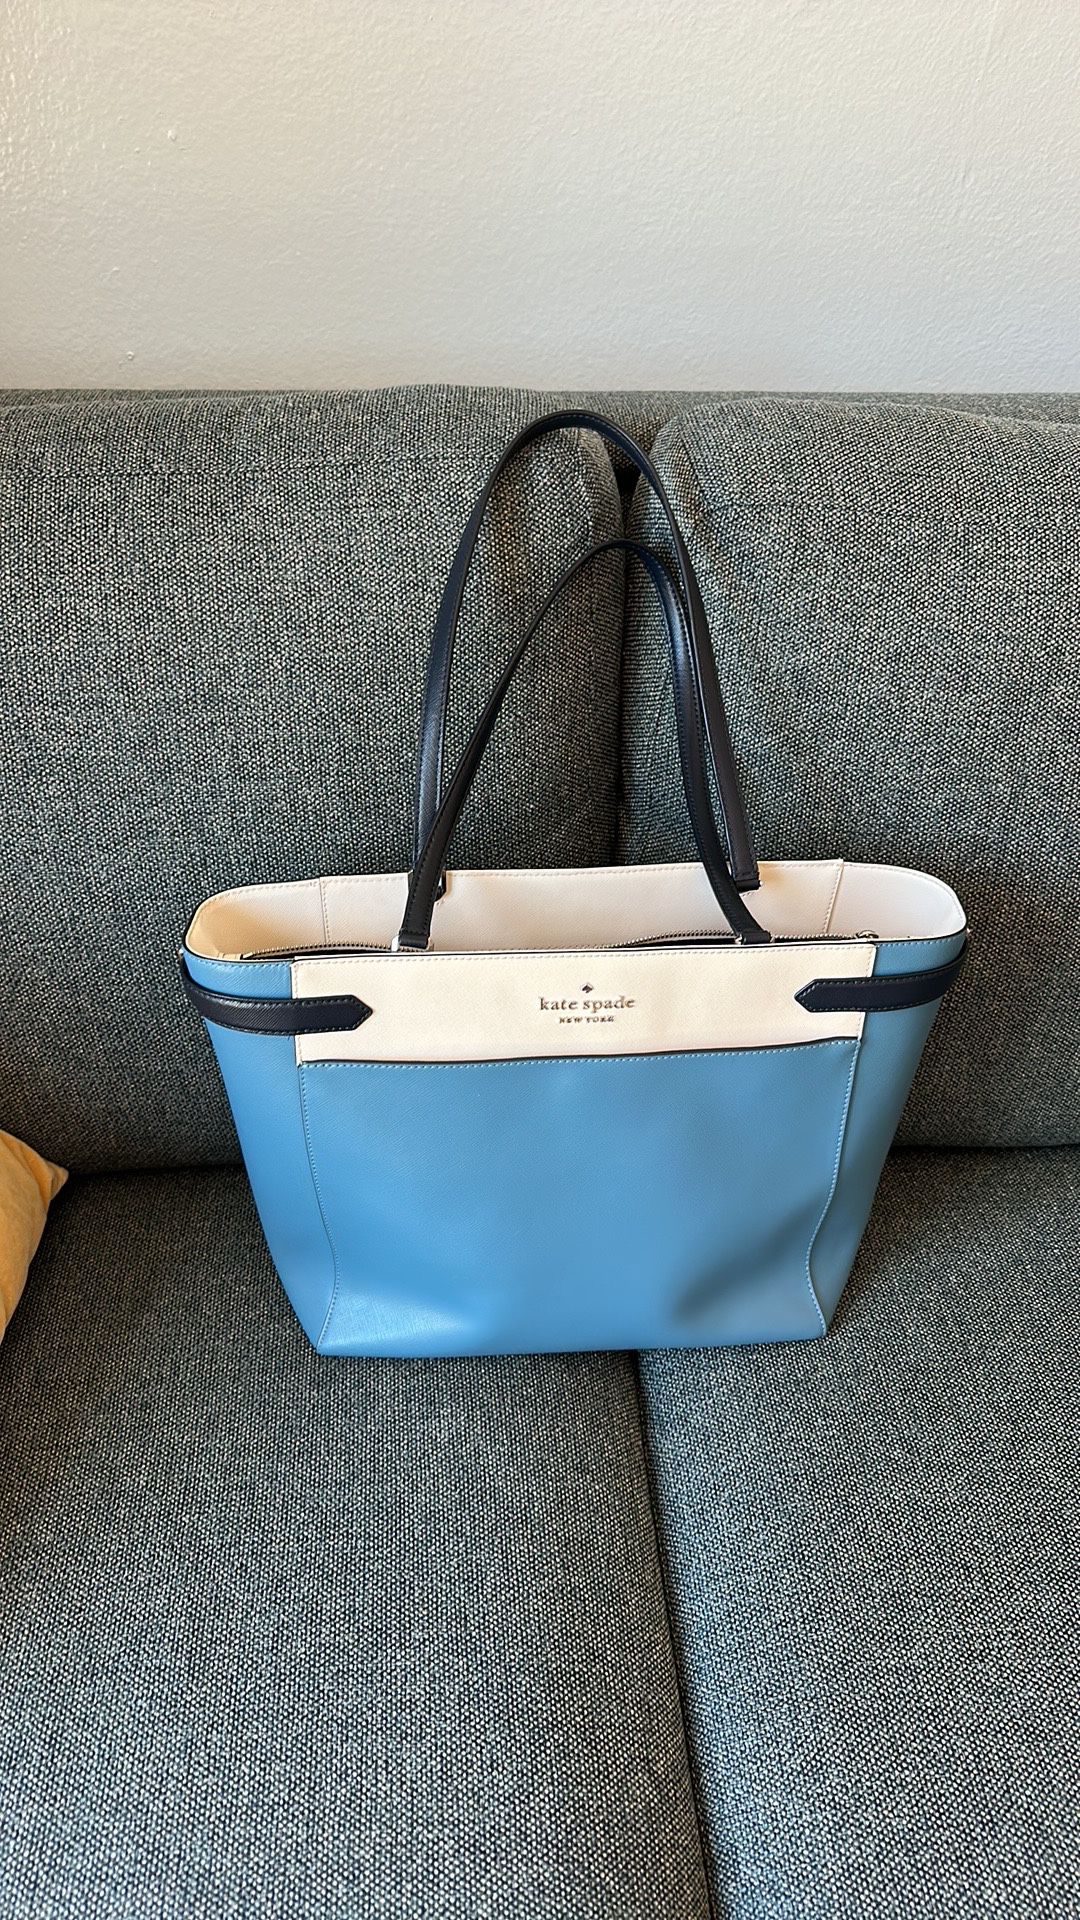 Kate Spade Staci Laptop Bag for Sale in Huntington Beach, CA - OfferUp